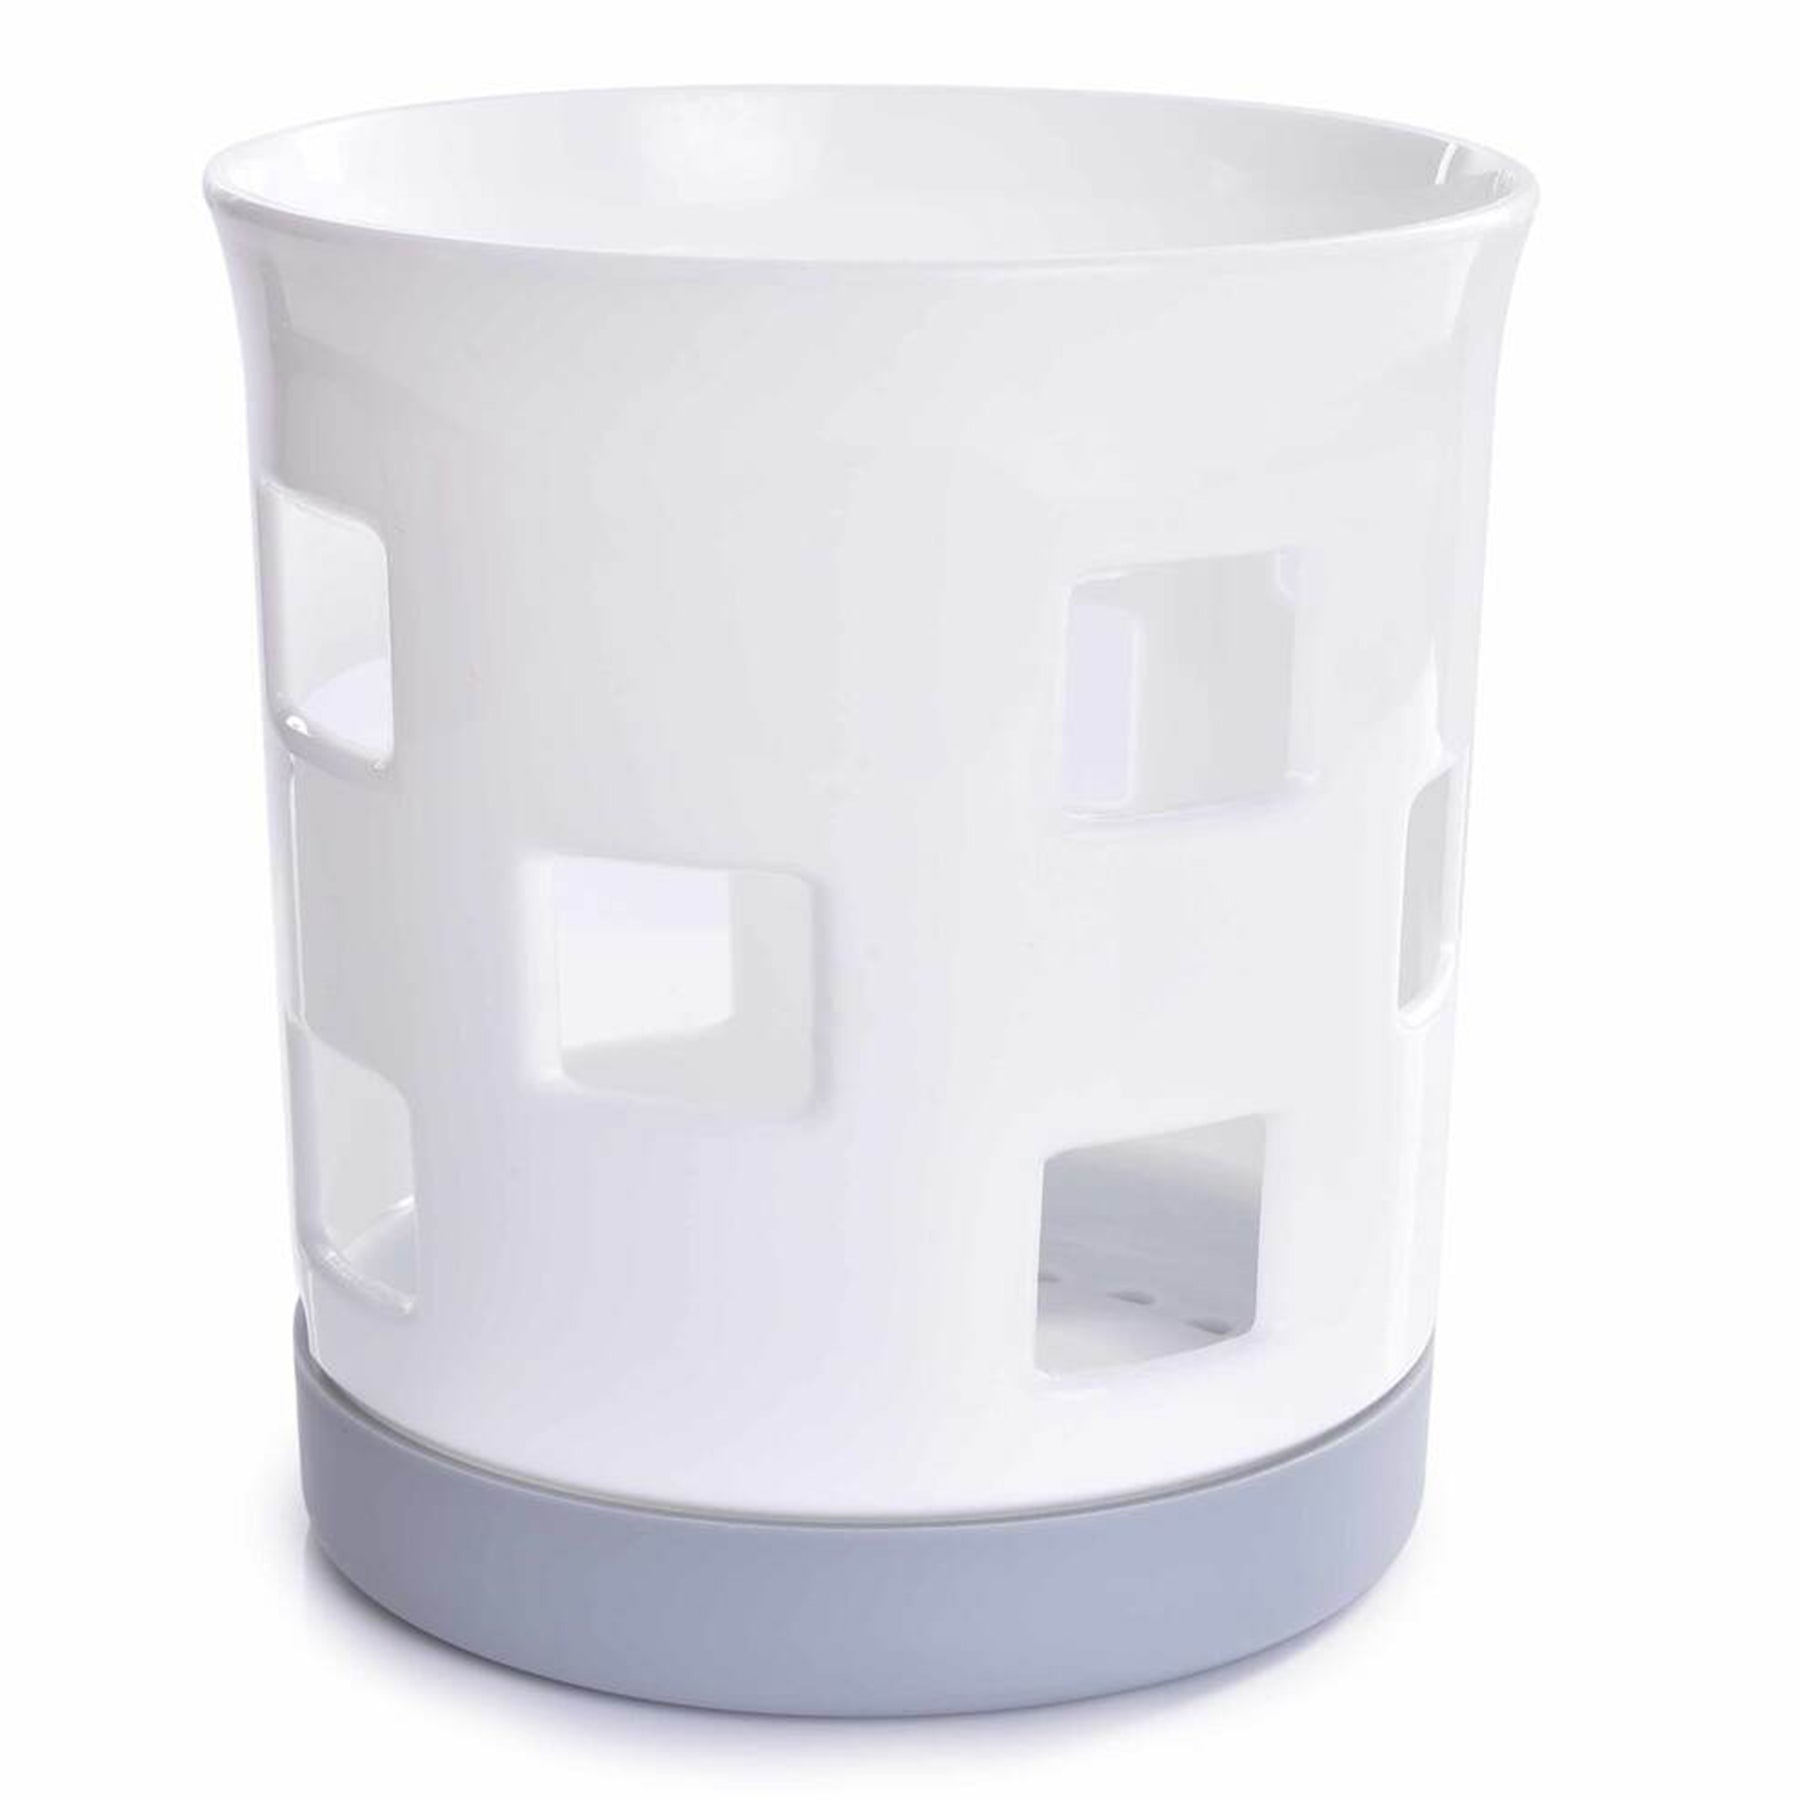 Plastic cutlery holder - White & Grey Color